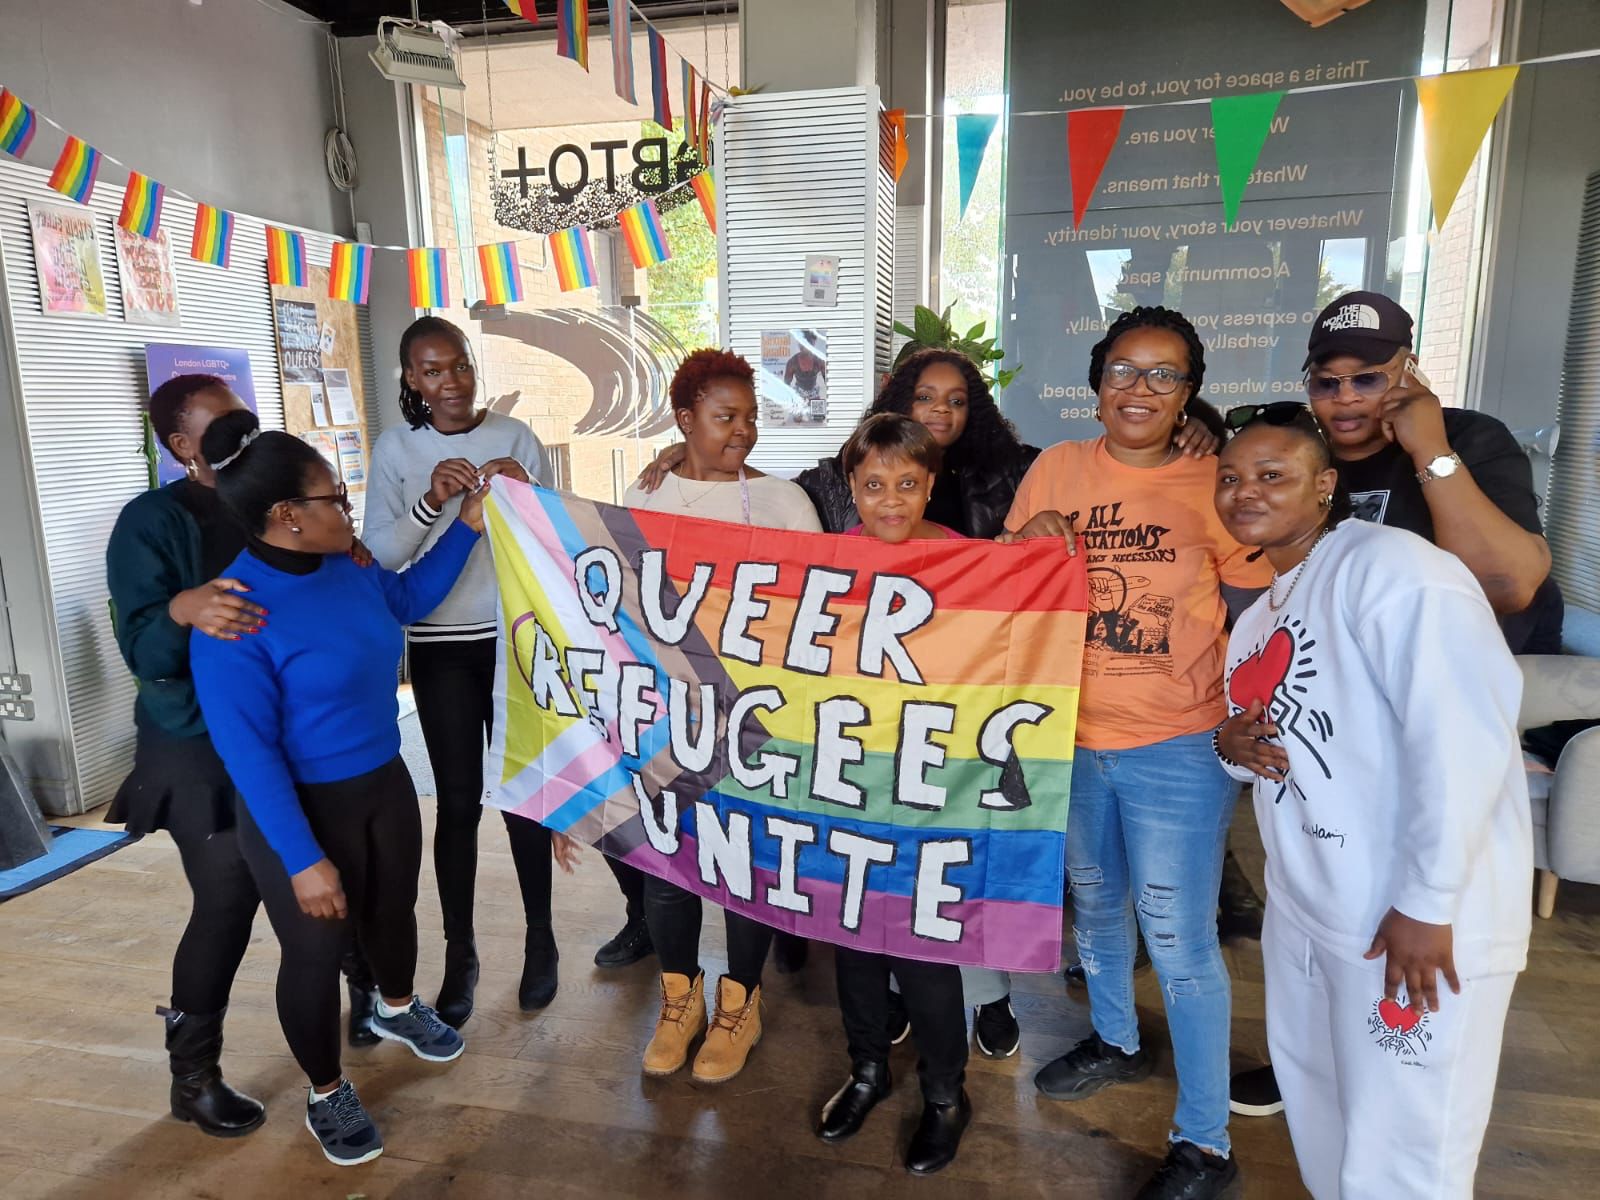 Group of members from Queer Refugee Unite holding an LGBTQ+ banner